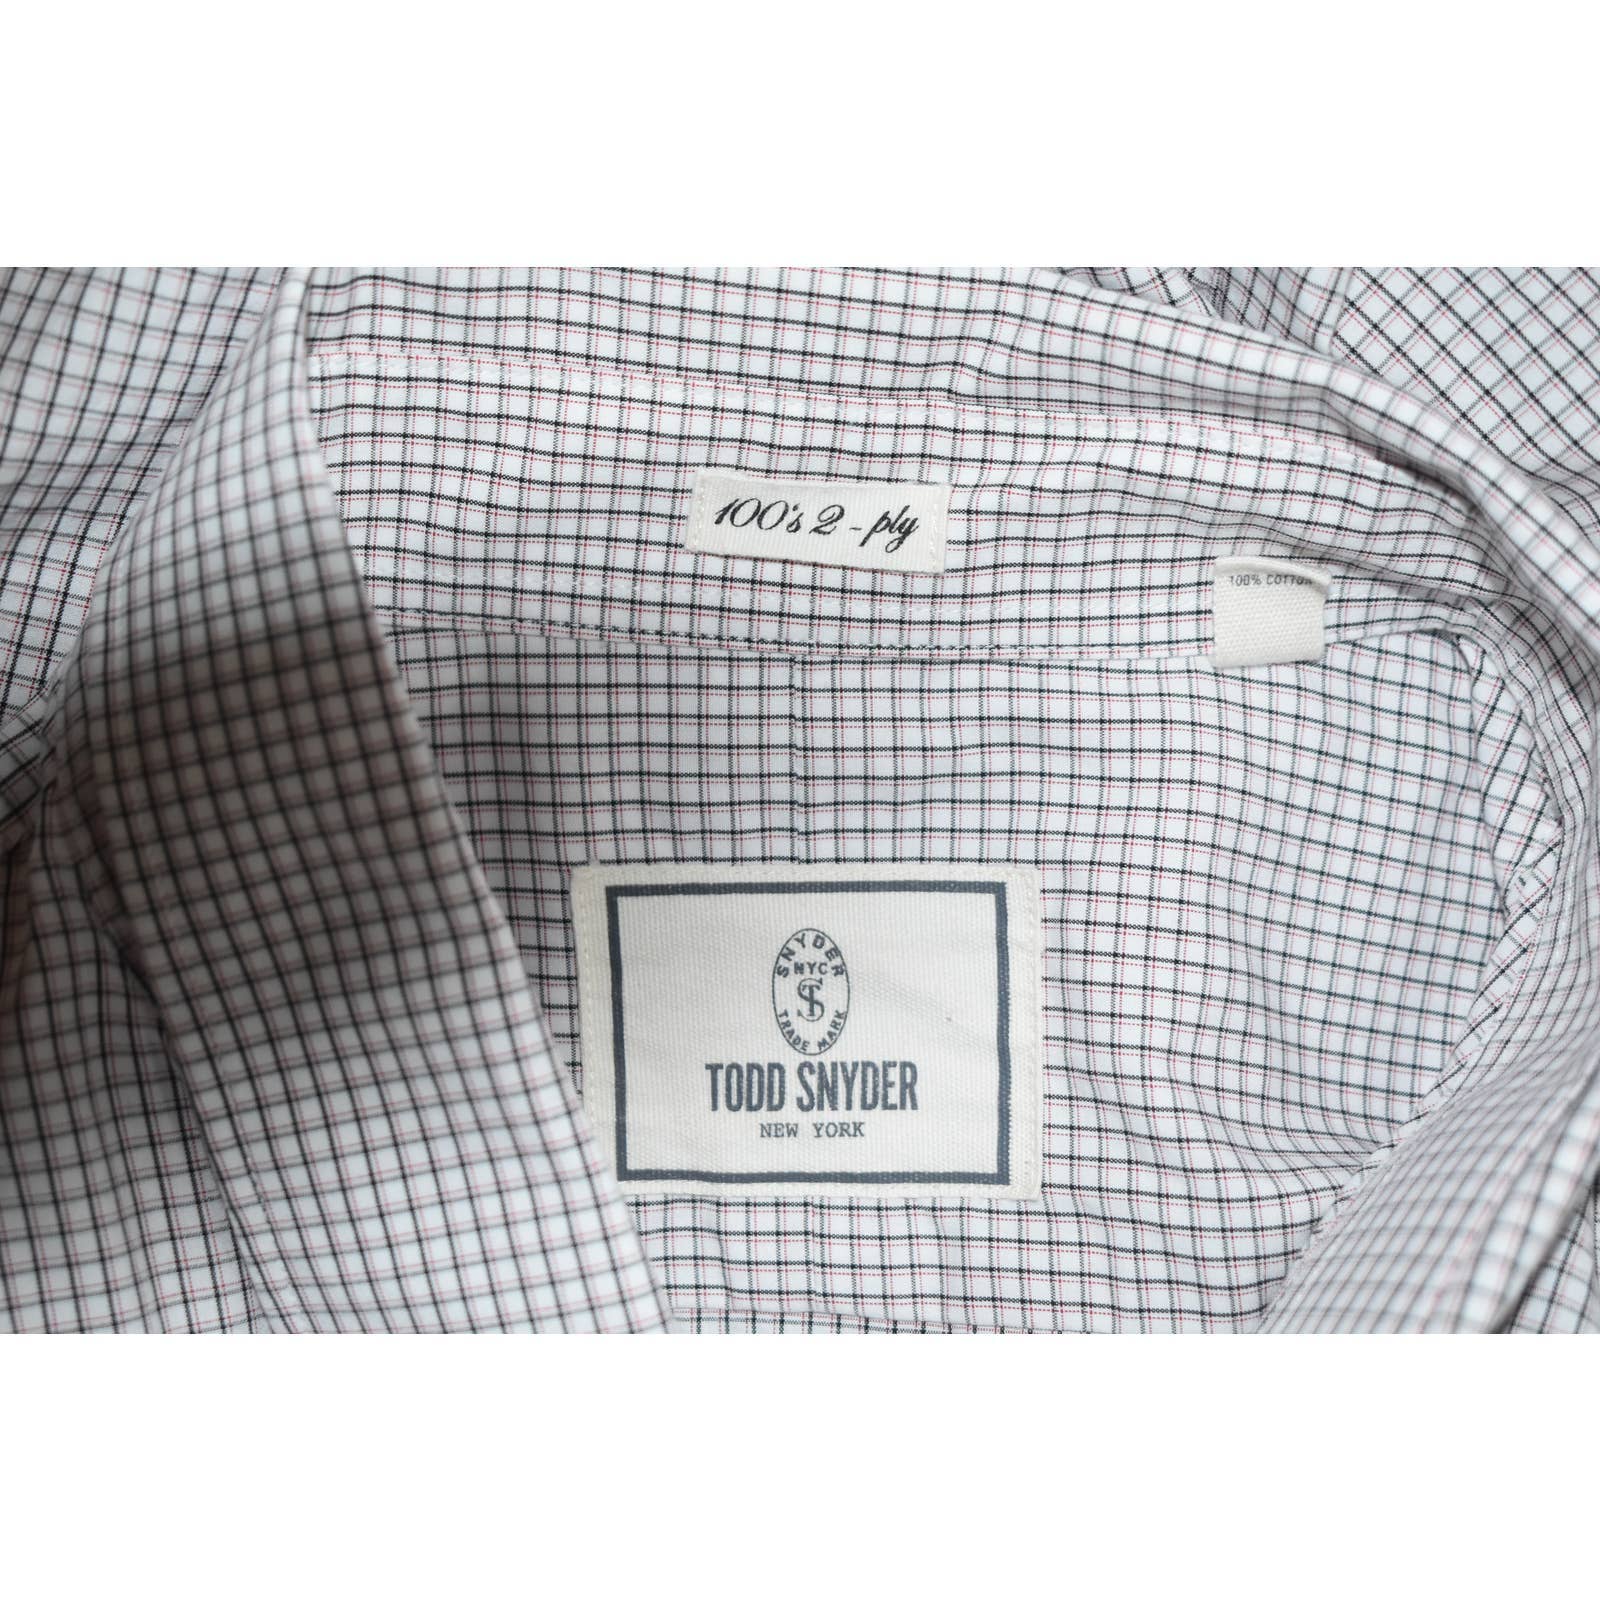 Todd Snyder White Red Blue Checked  Button Up Shirt - 16 34/35